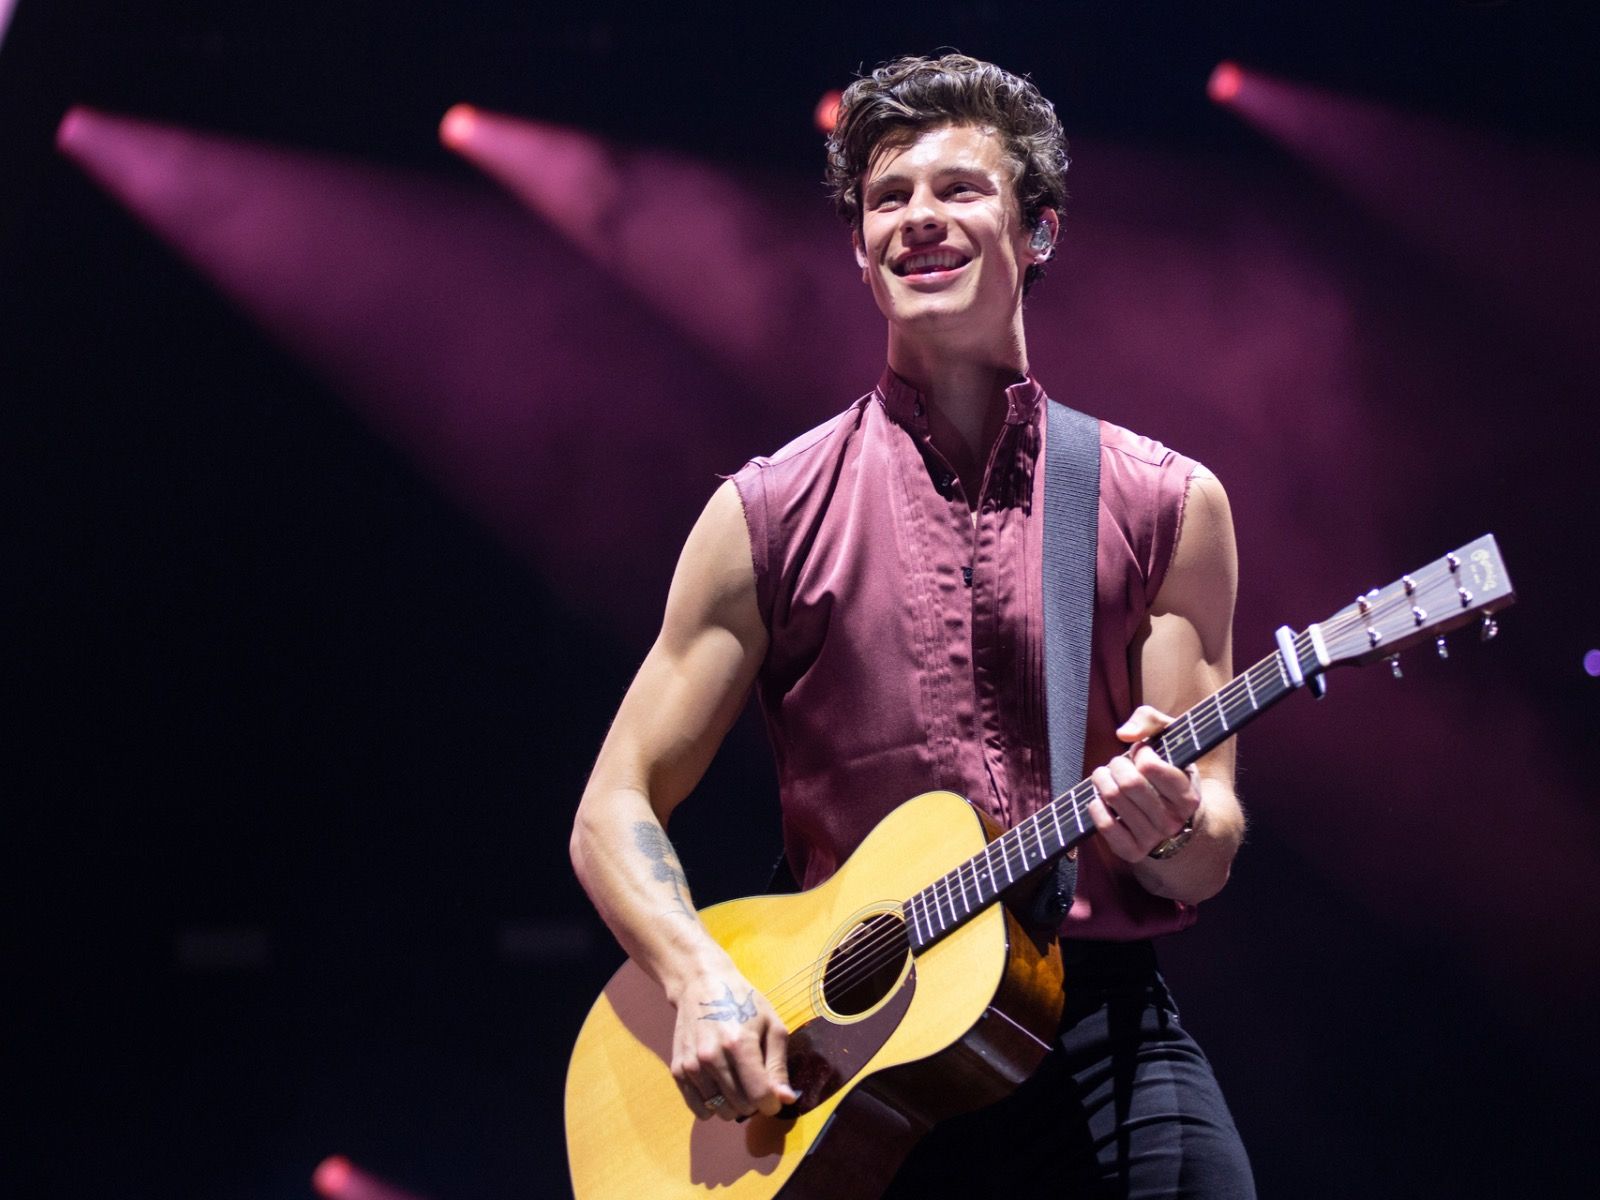 reasons why you shouldn't have missed Shawn Mendes' concert at Fiserv Forum